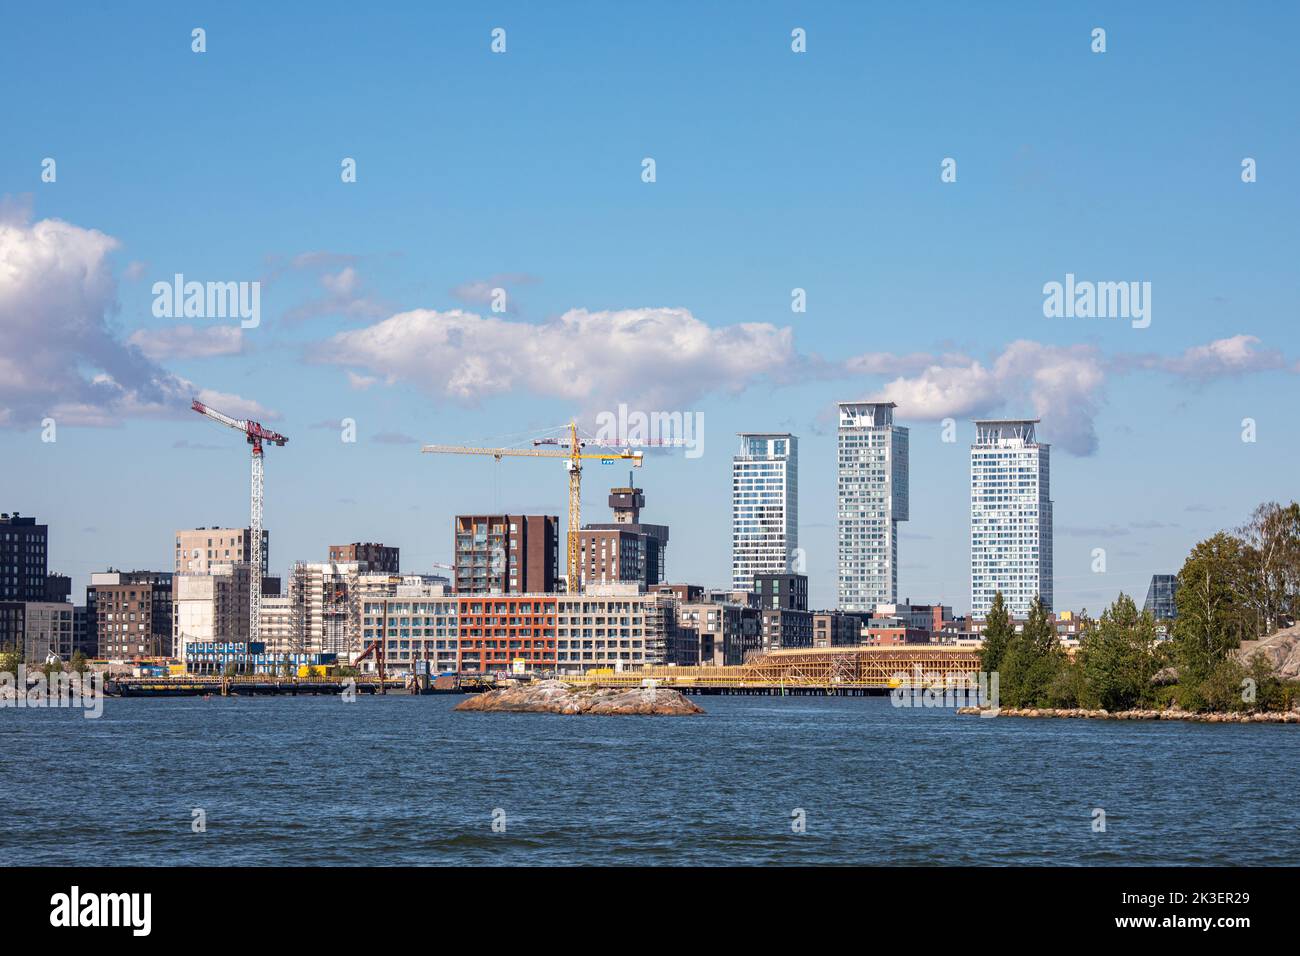 Sompasaari district with Kalasatama high-rise buildings in the background in Helsinki, Finland Stock Photo